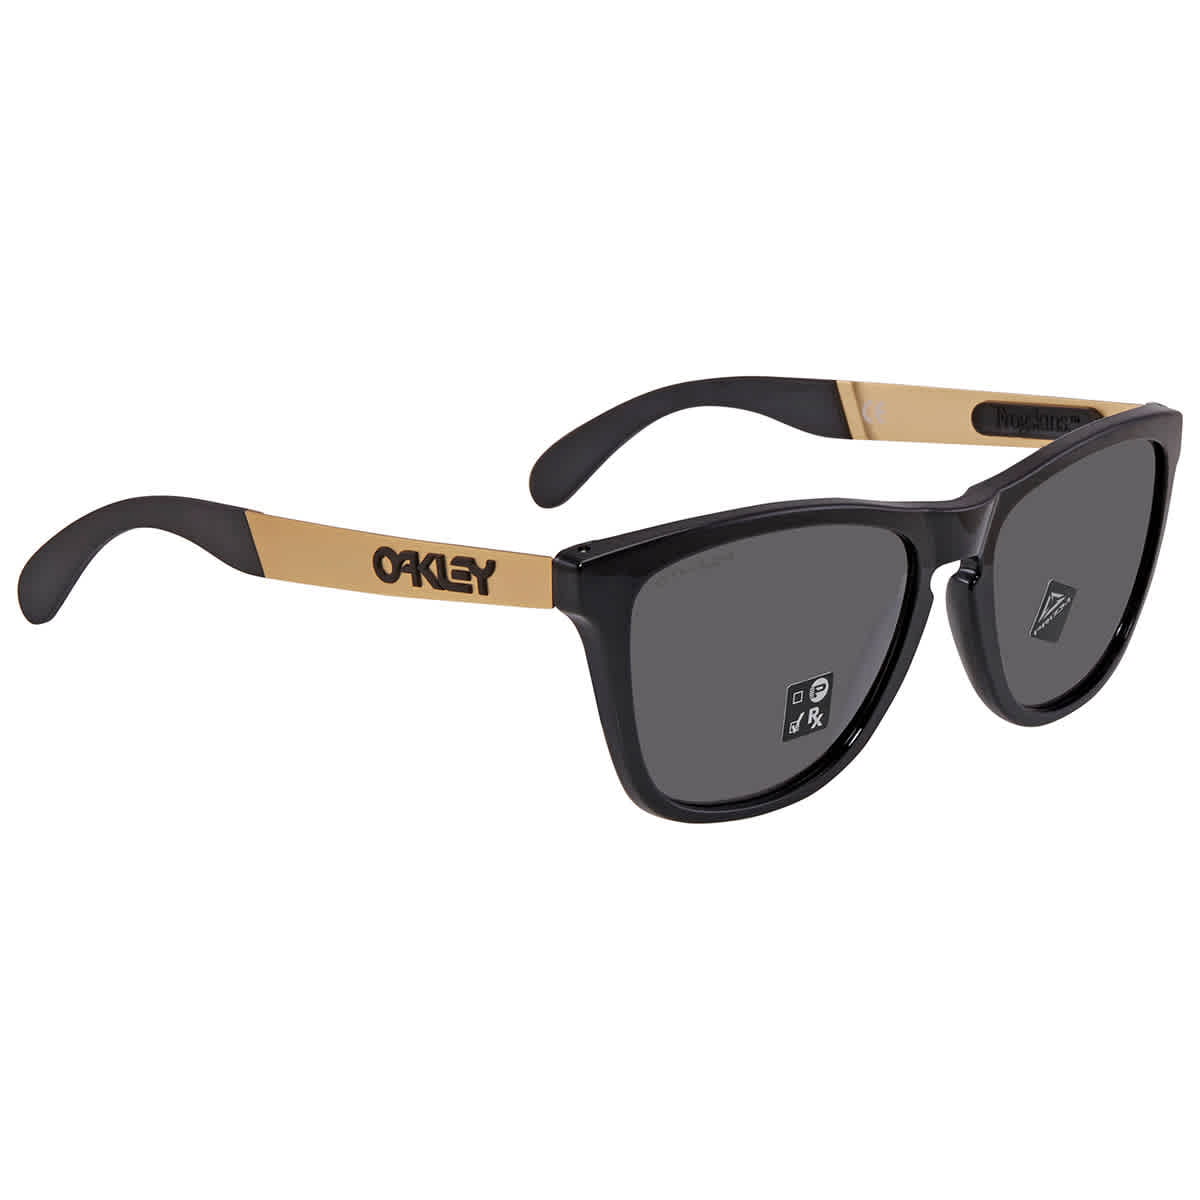 Oakley Frogskins Mix Prizm Black Square Sunglasses OO9428 942802 55 -  